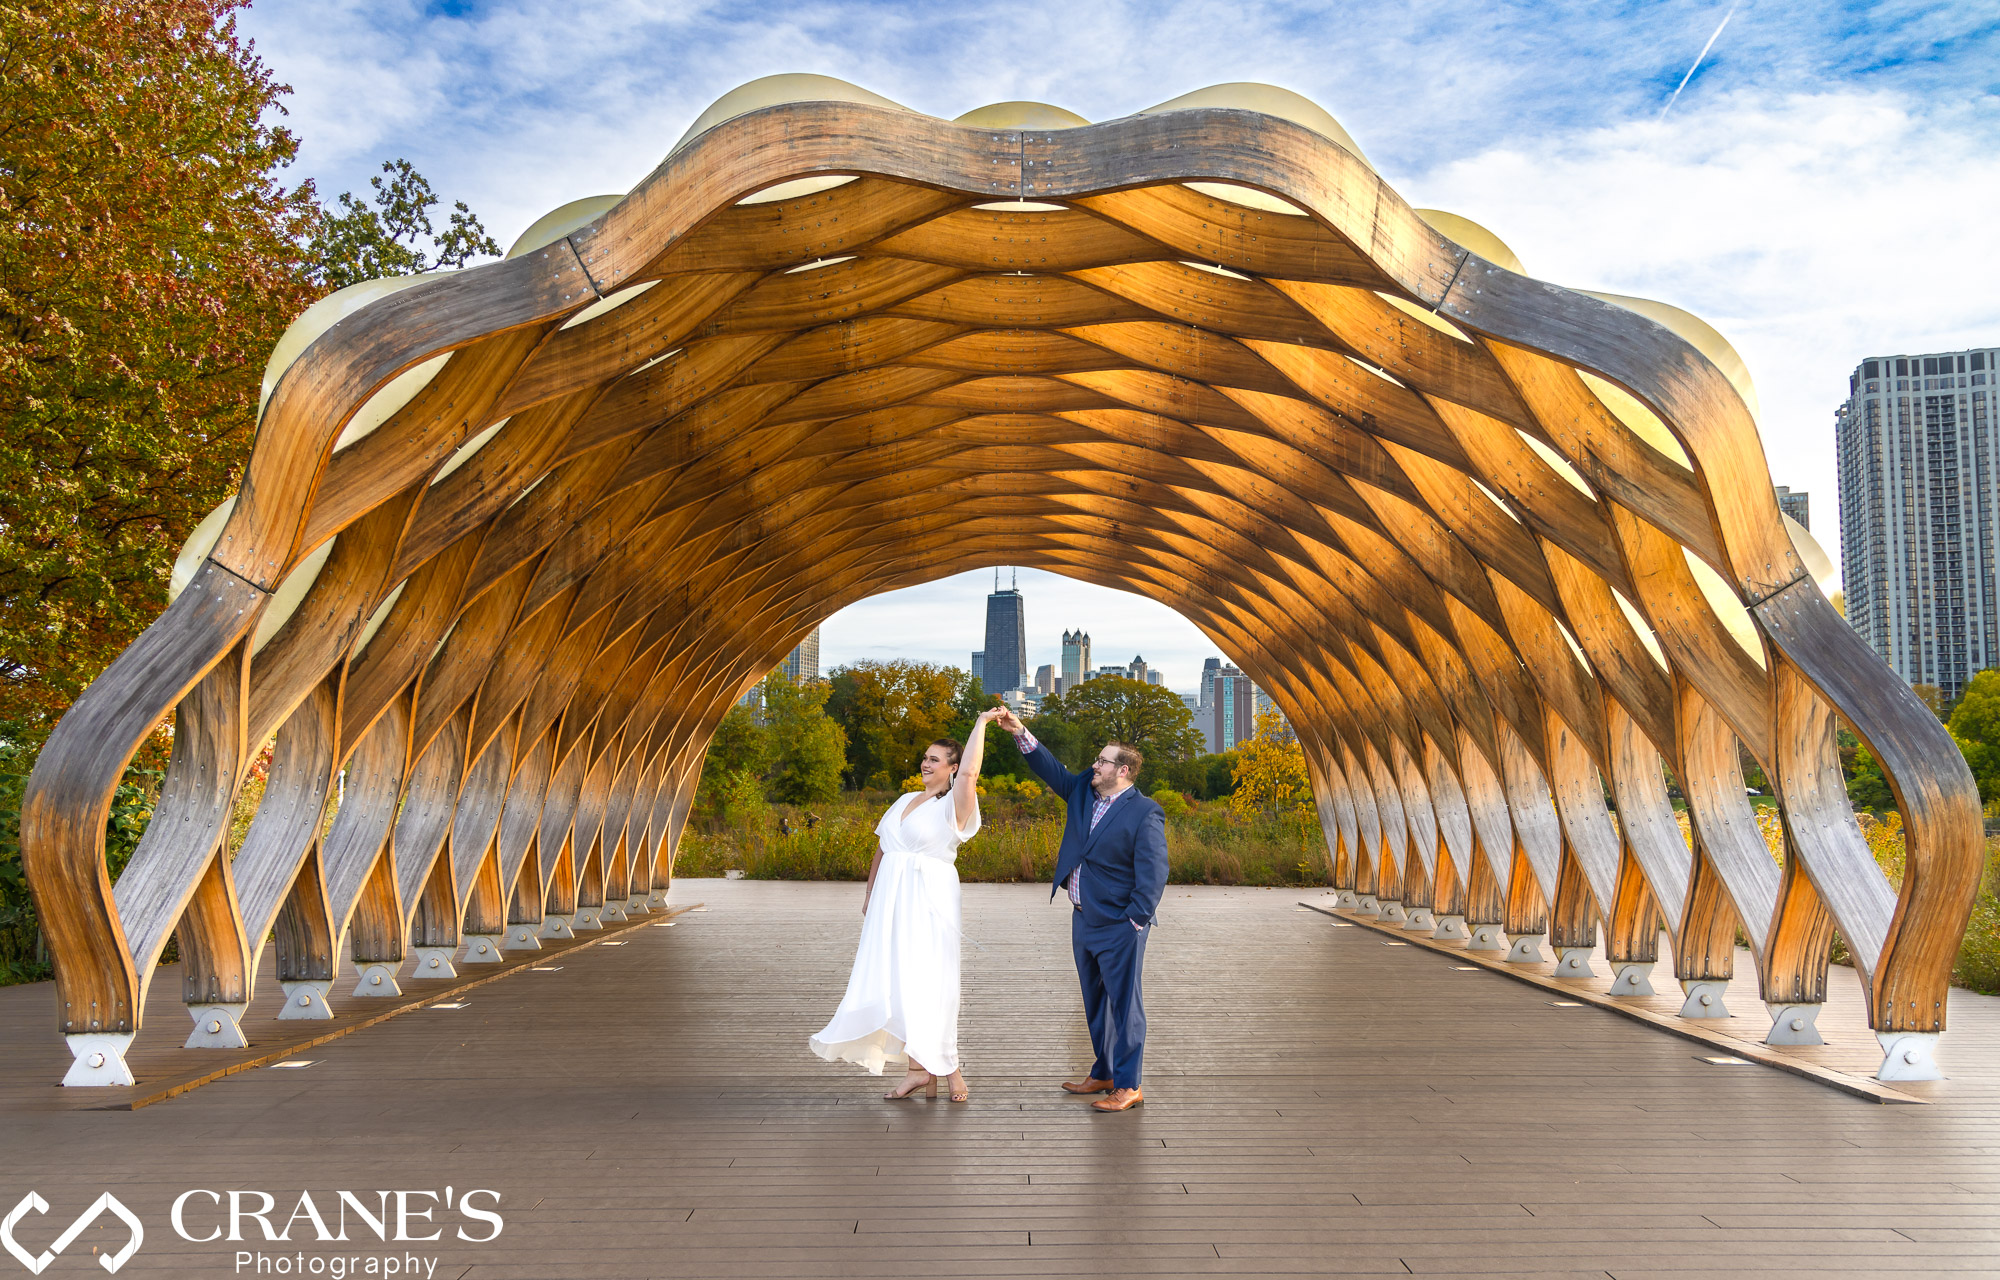 An engaged couple twirling at the Honeycomb in Lincoln Park with the iconic skyline of downtown Chicago in the background.